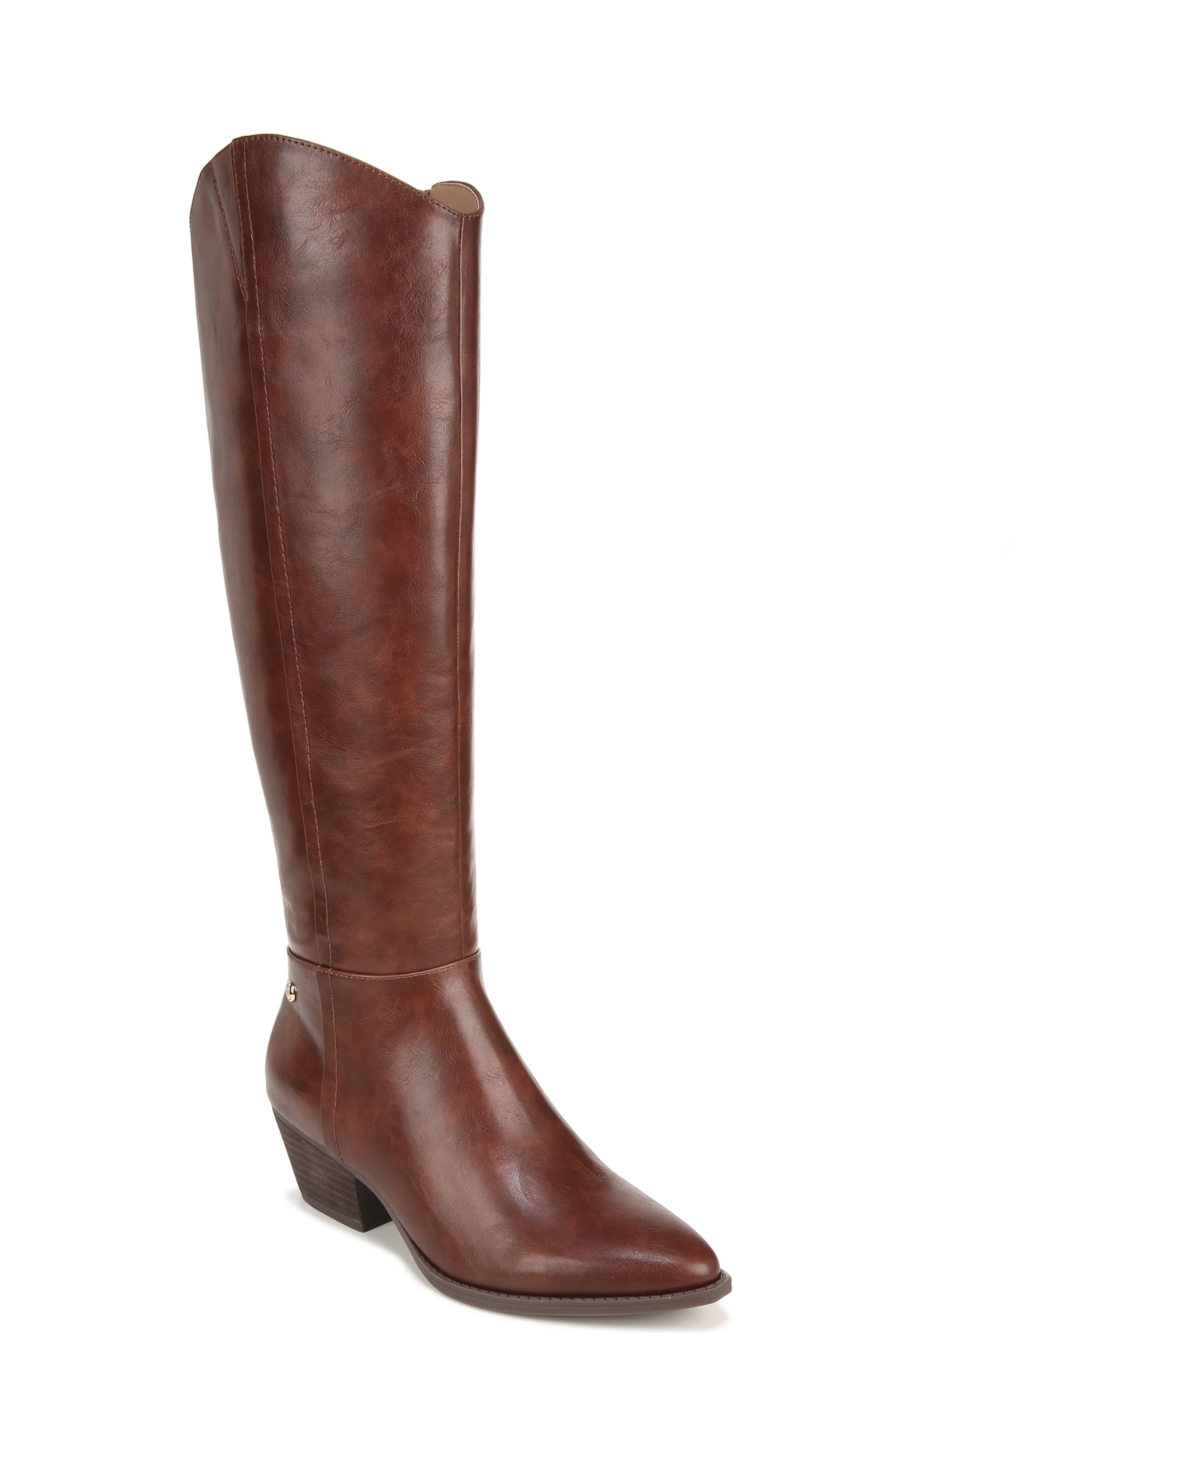 Reese Wide Calf Knee High Boots - Chestnut Faux Leather